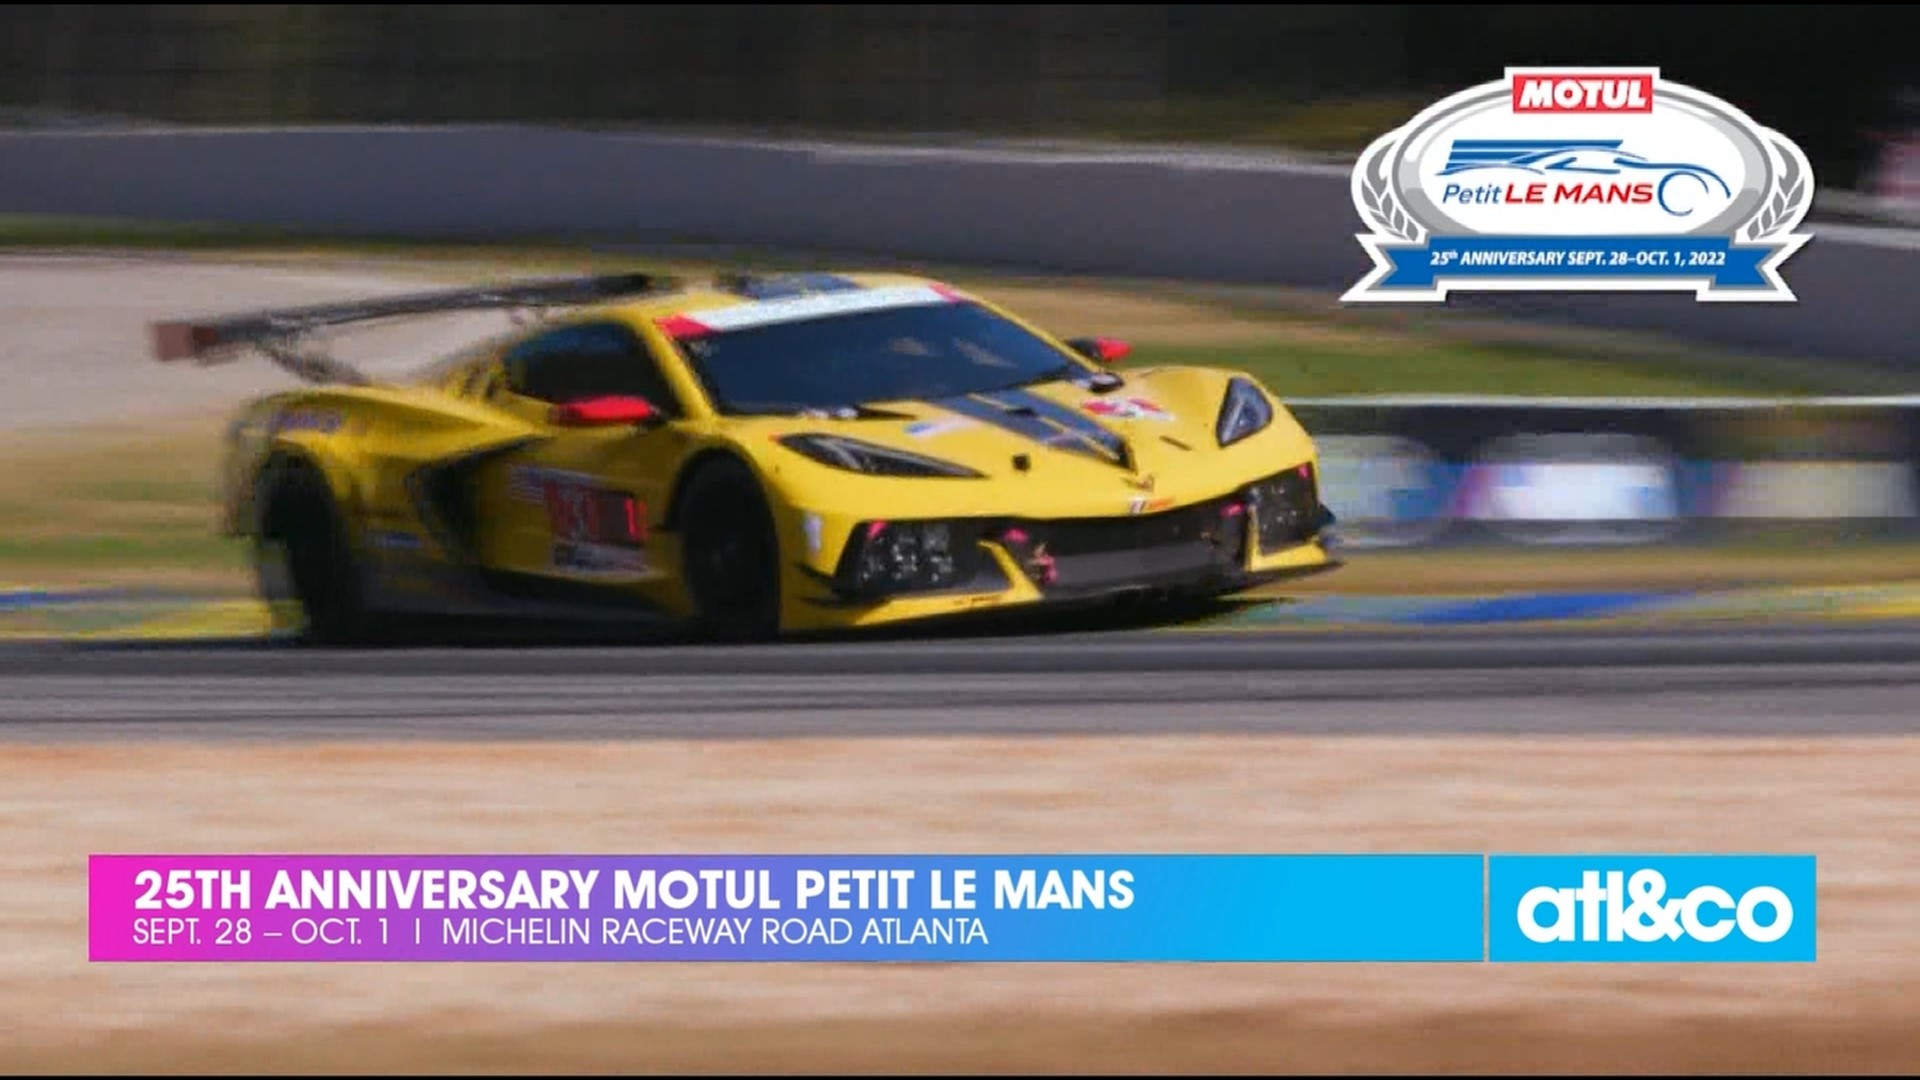 Rev up your engines for the Motul Petit Le Mans at the Michelin Raceway Road Atlanta, starting September 28th.